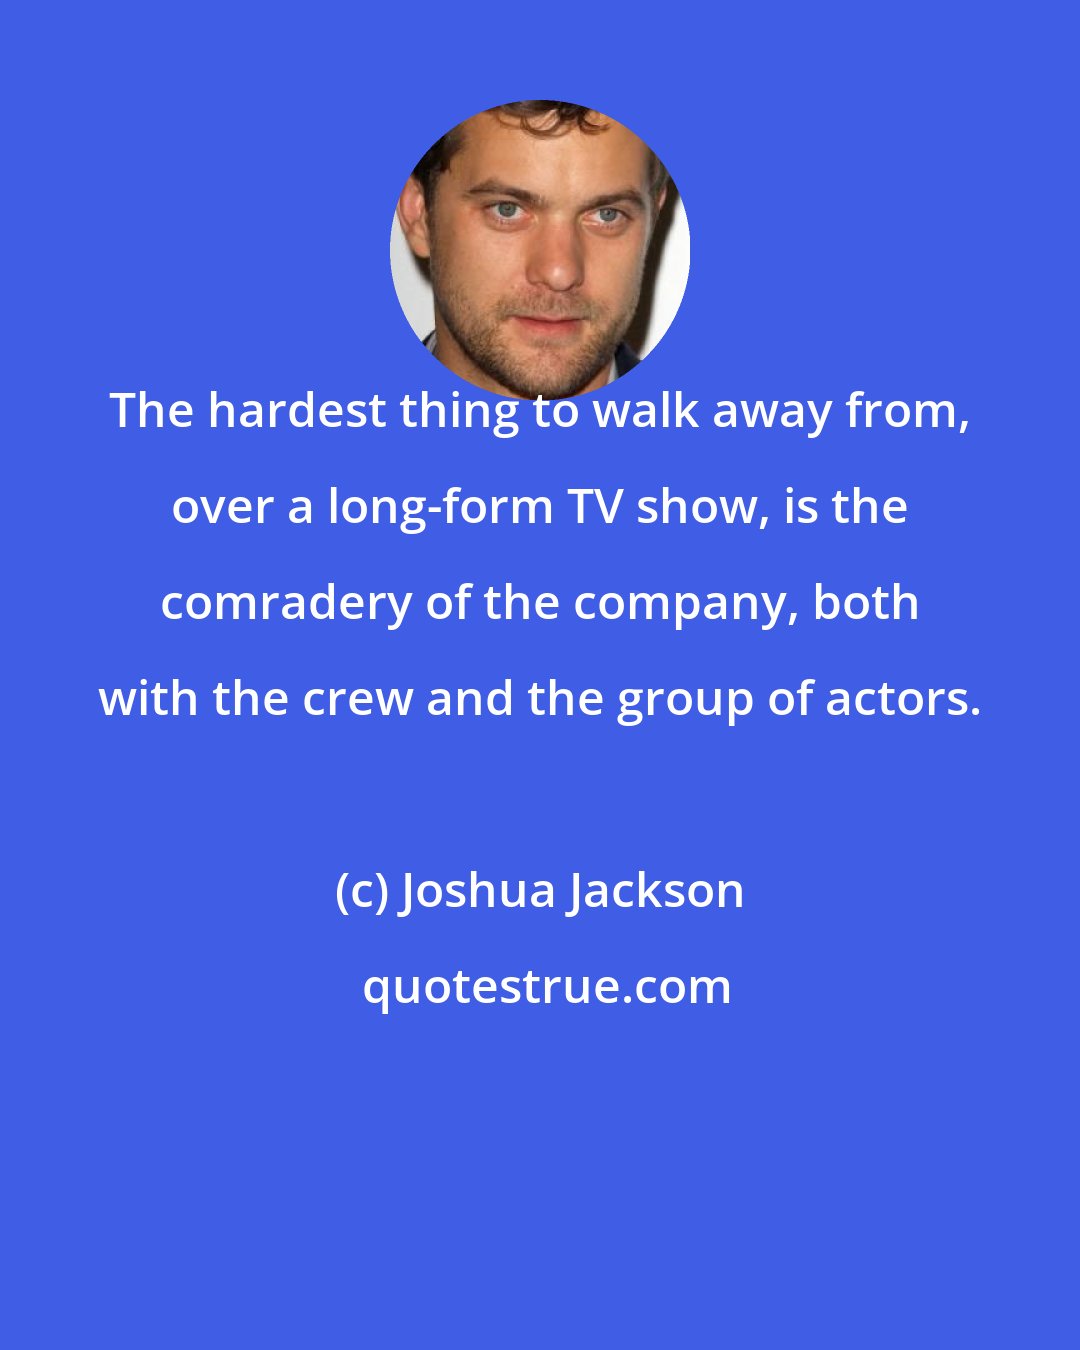 Joshua Jackson: The hardest thing to walk away from, over a long-form TV show, is the comradery of the company, both with the crew and the group of actors.